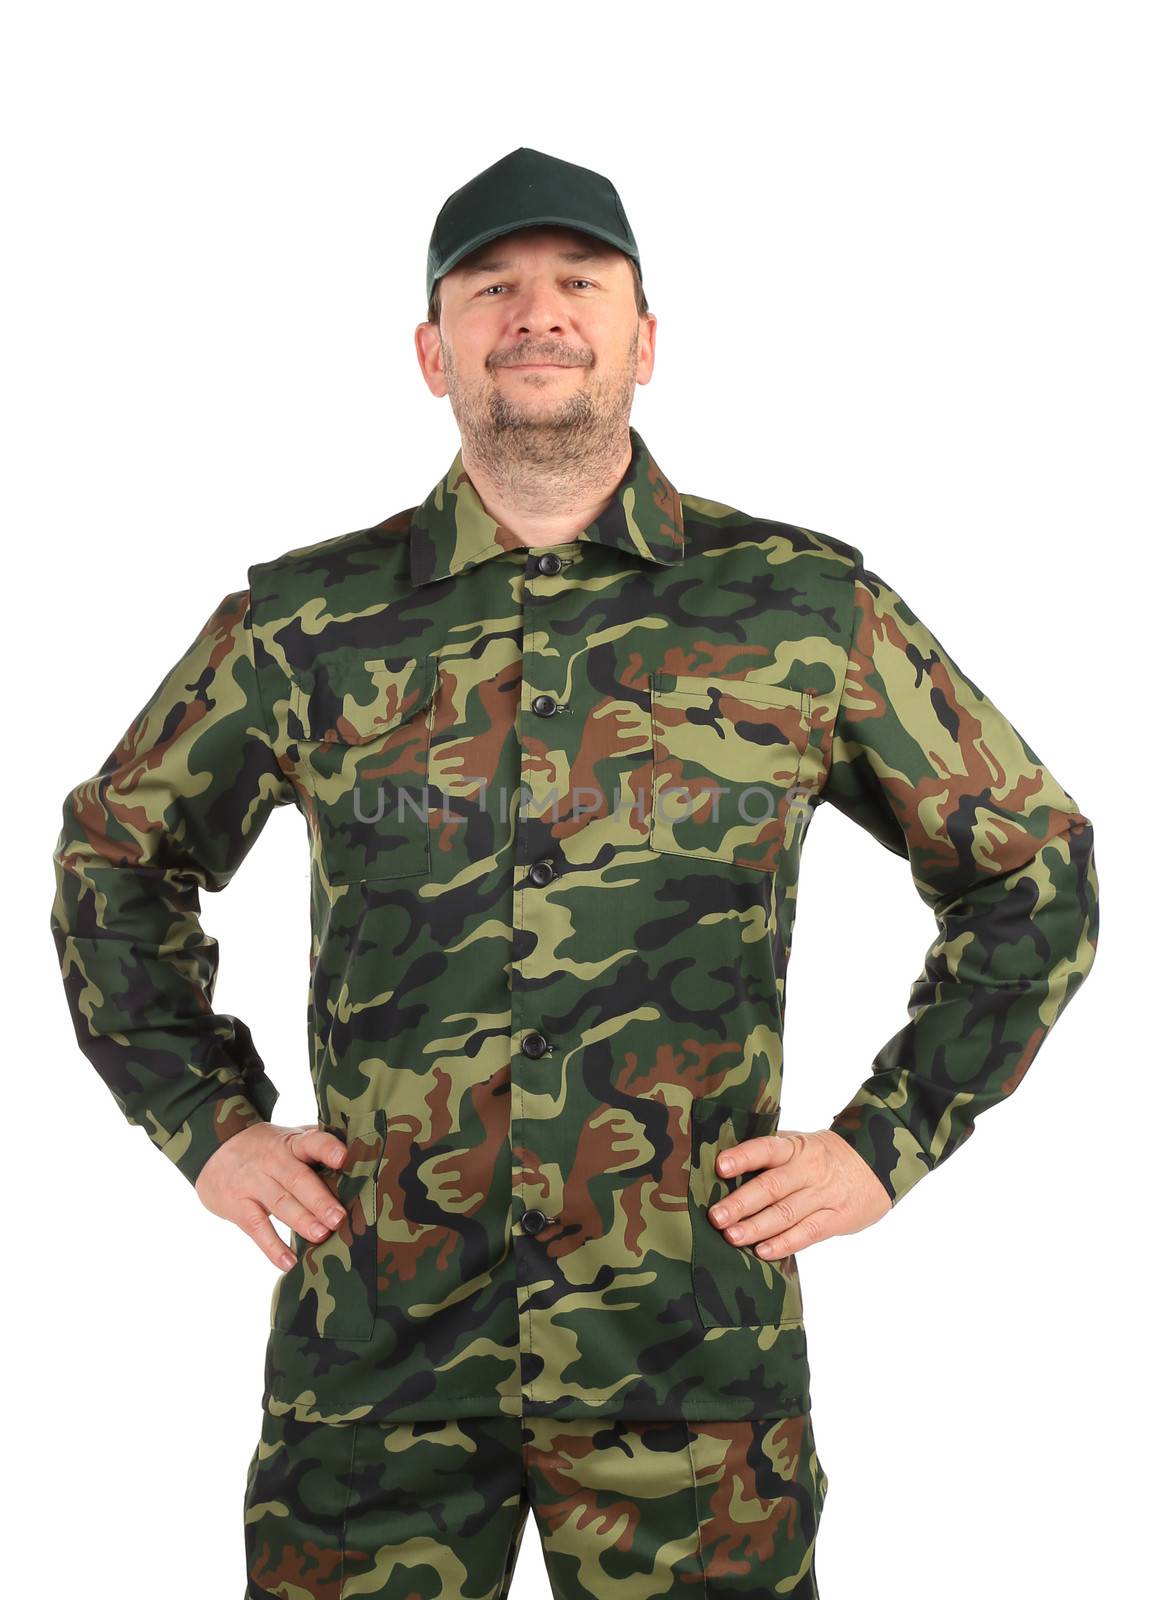 Proud man in military suit. Isolated on a white background.